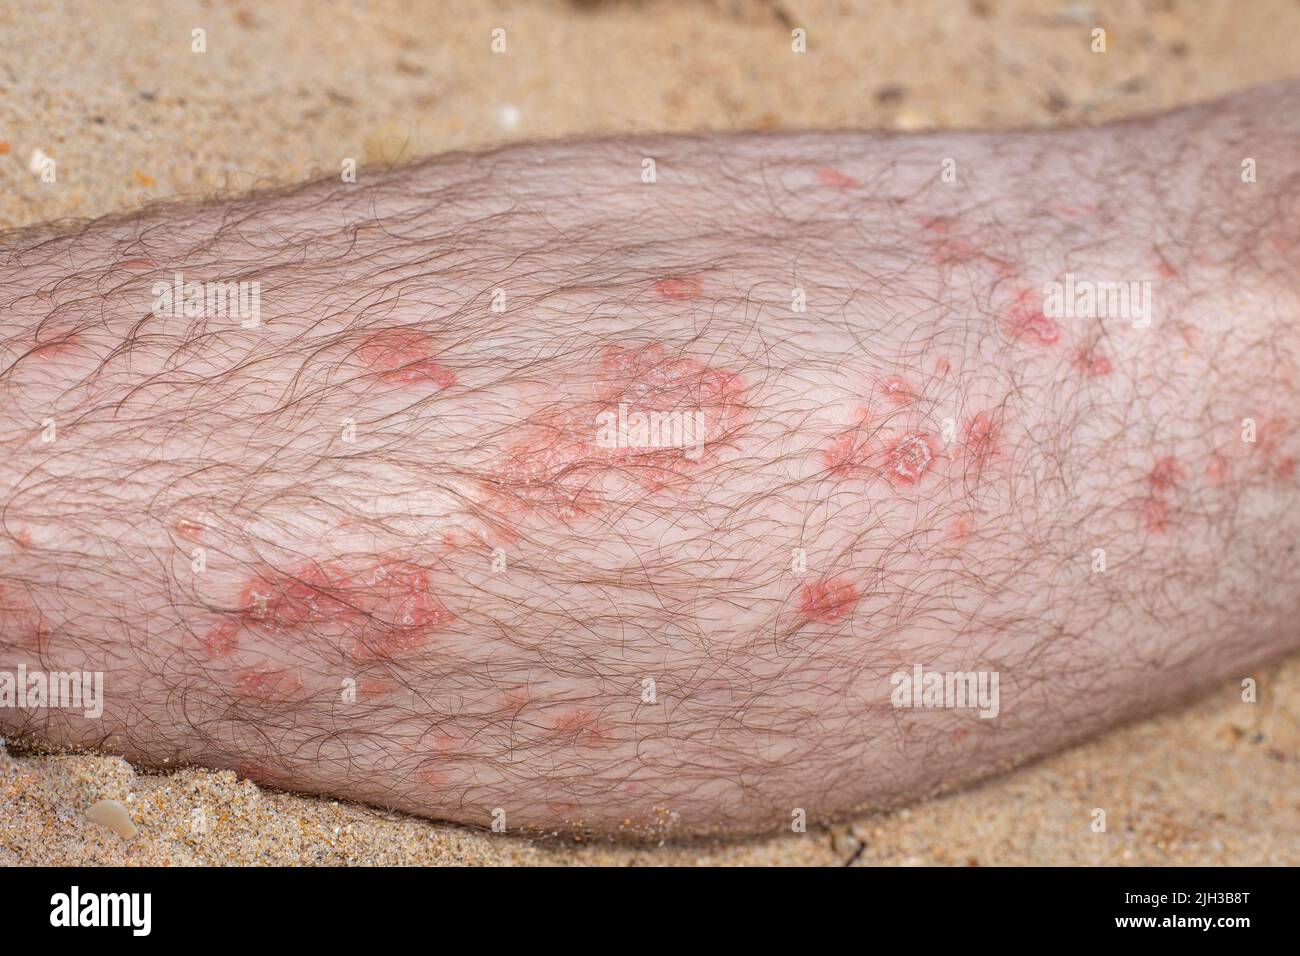 Part of a male leg with psoriatic plaques, covered with hair. Skin diseases in adults. Stock Photo